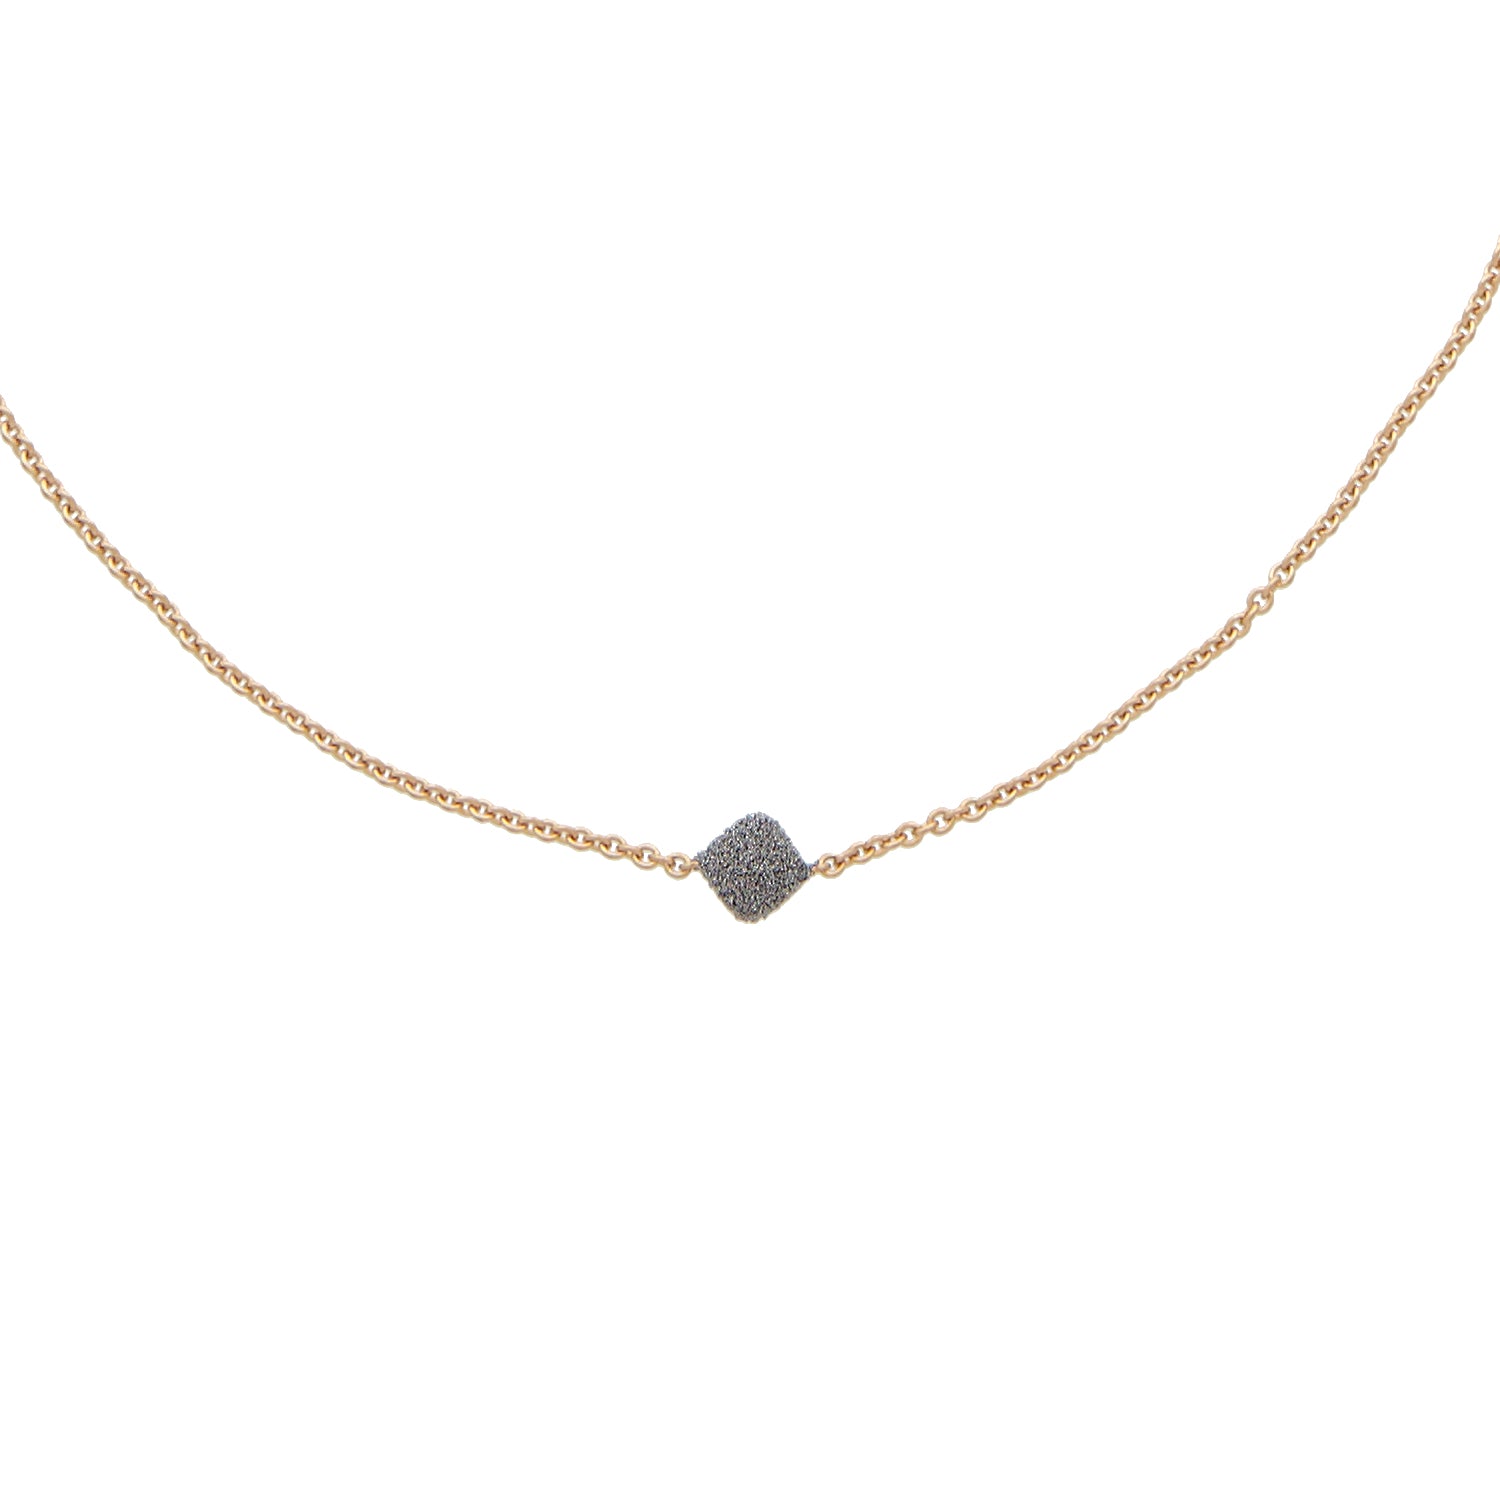 ROSE GOLD NECKLACE WITH CHECK SHAPE